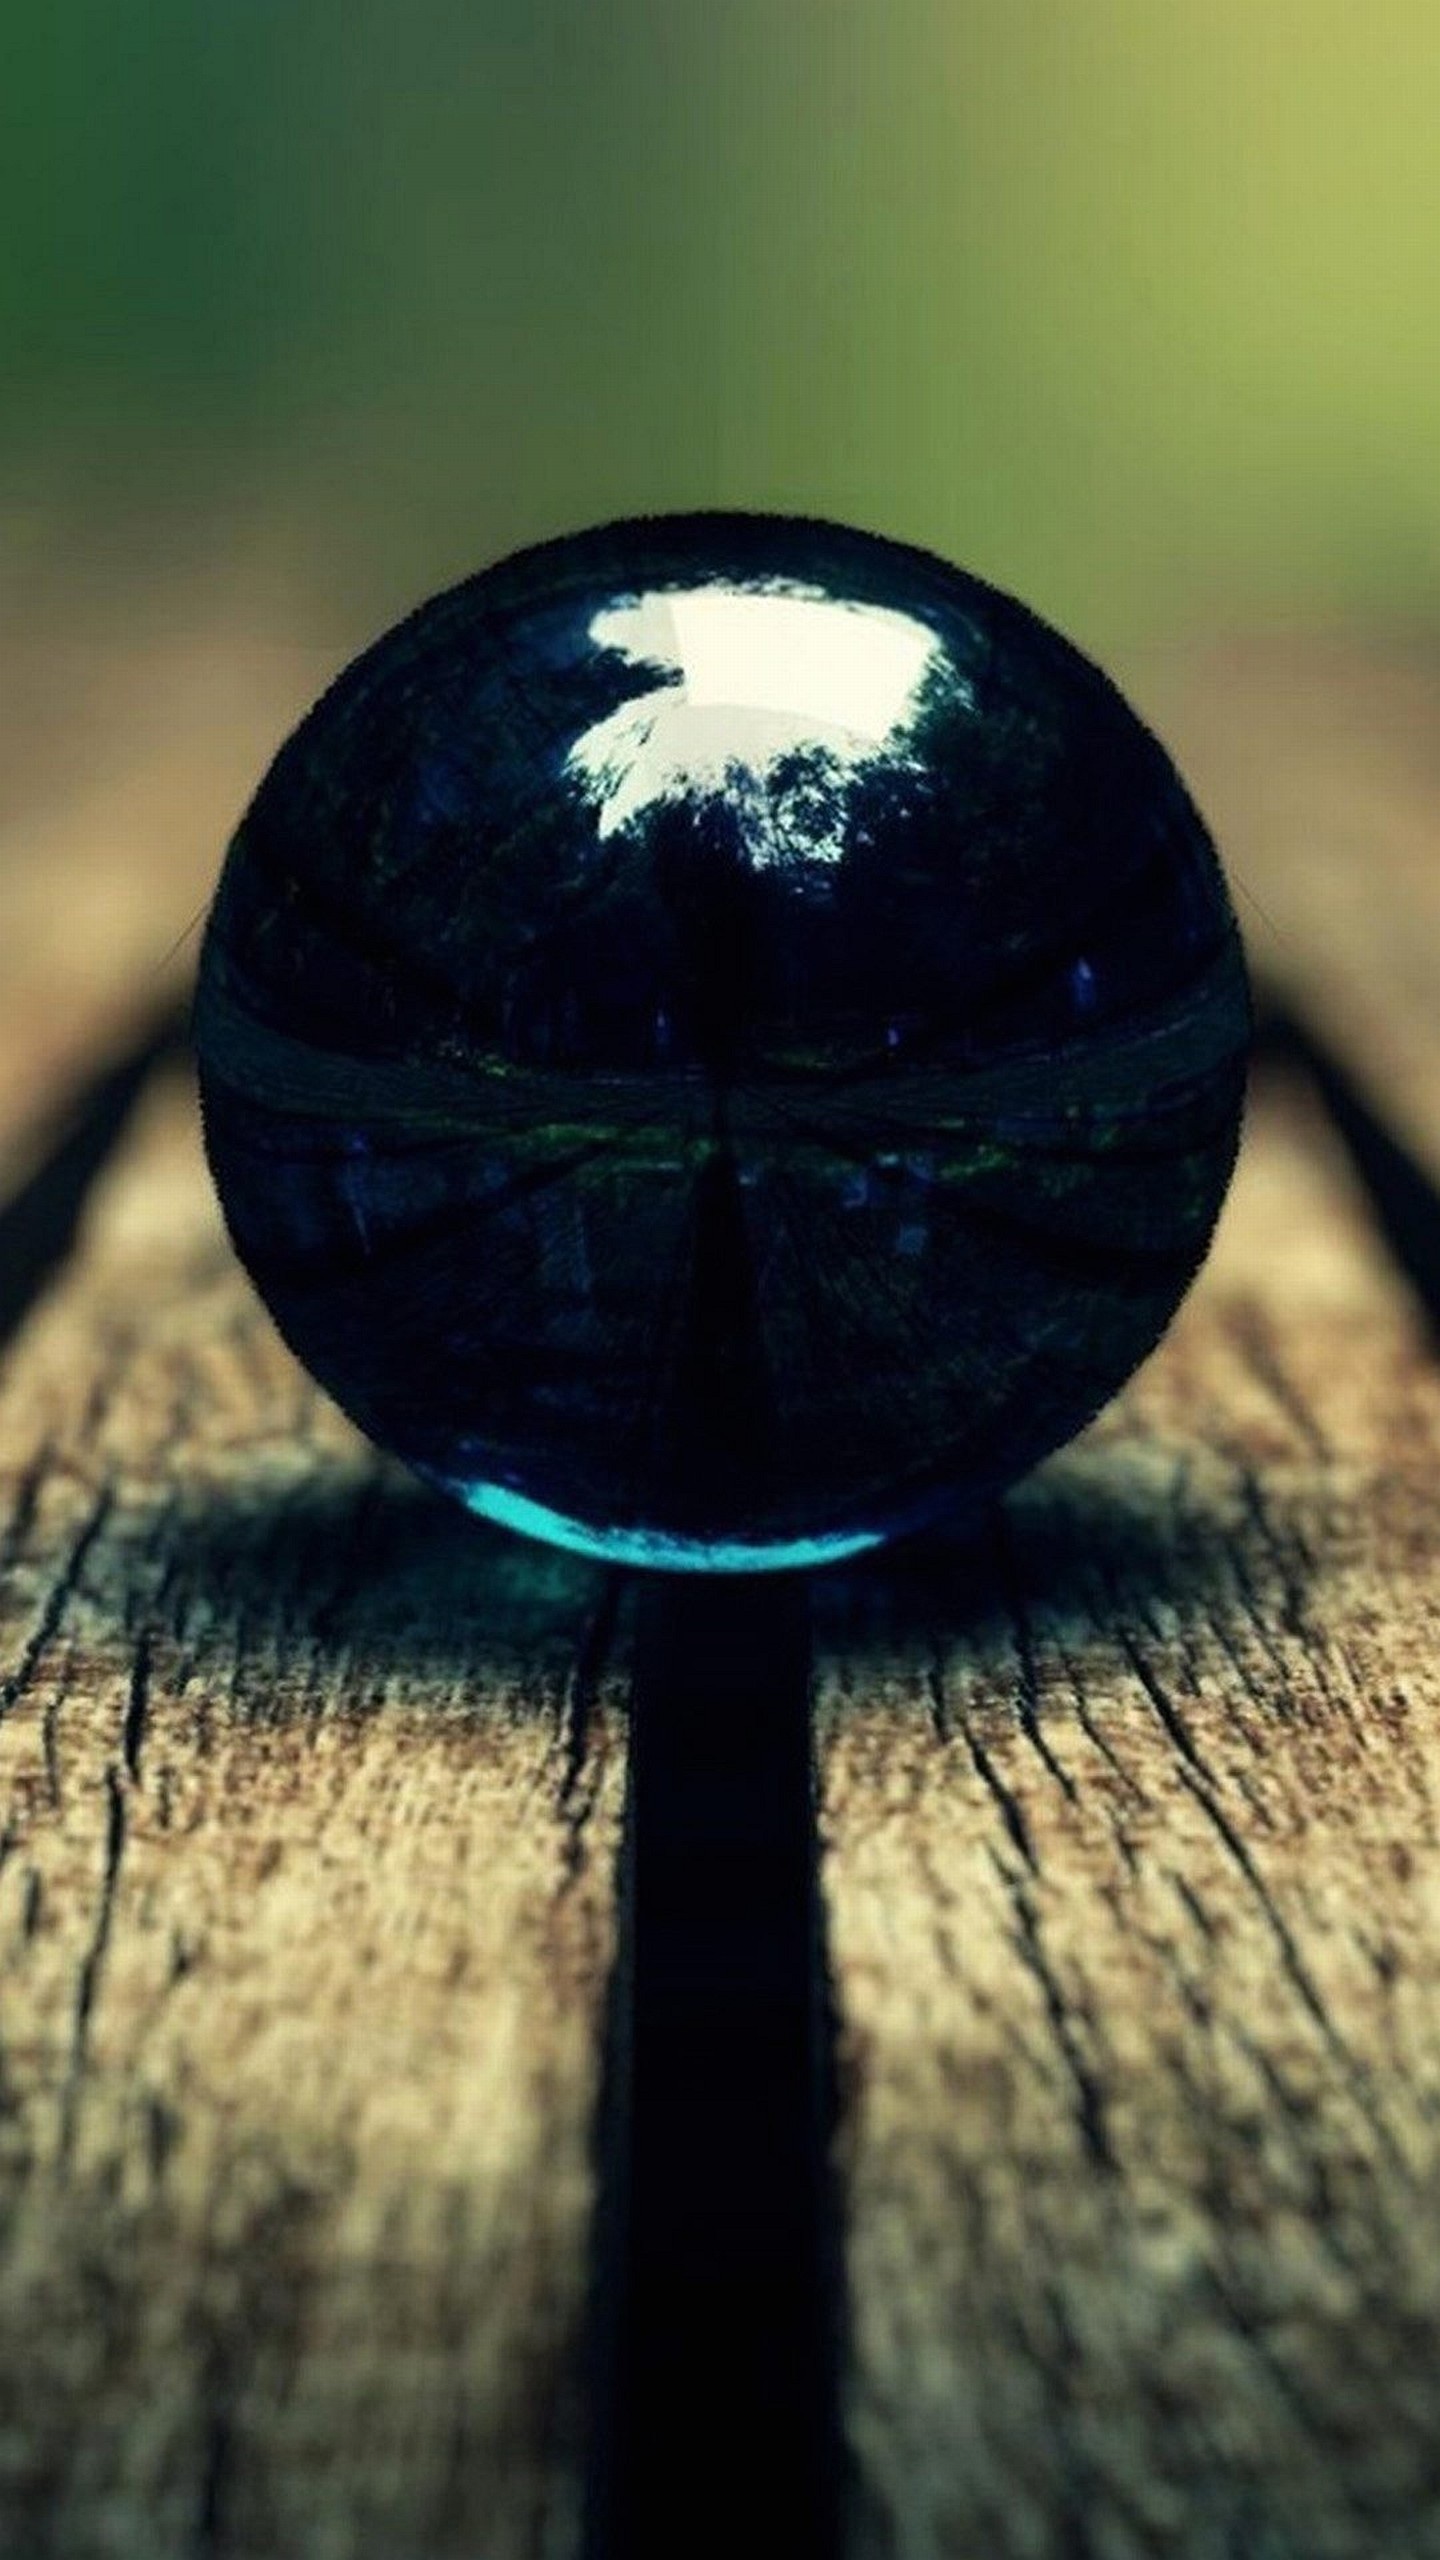 Wallpaper Lg Sphere Wood 1440p Photo Shared By Illa Fans